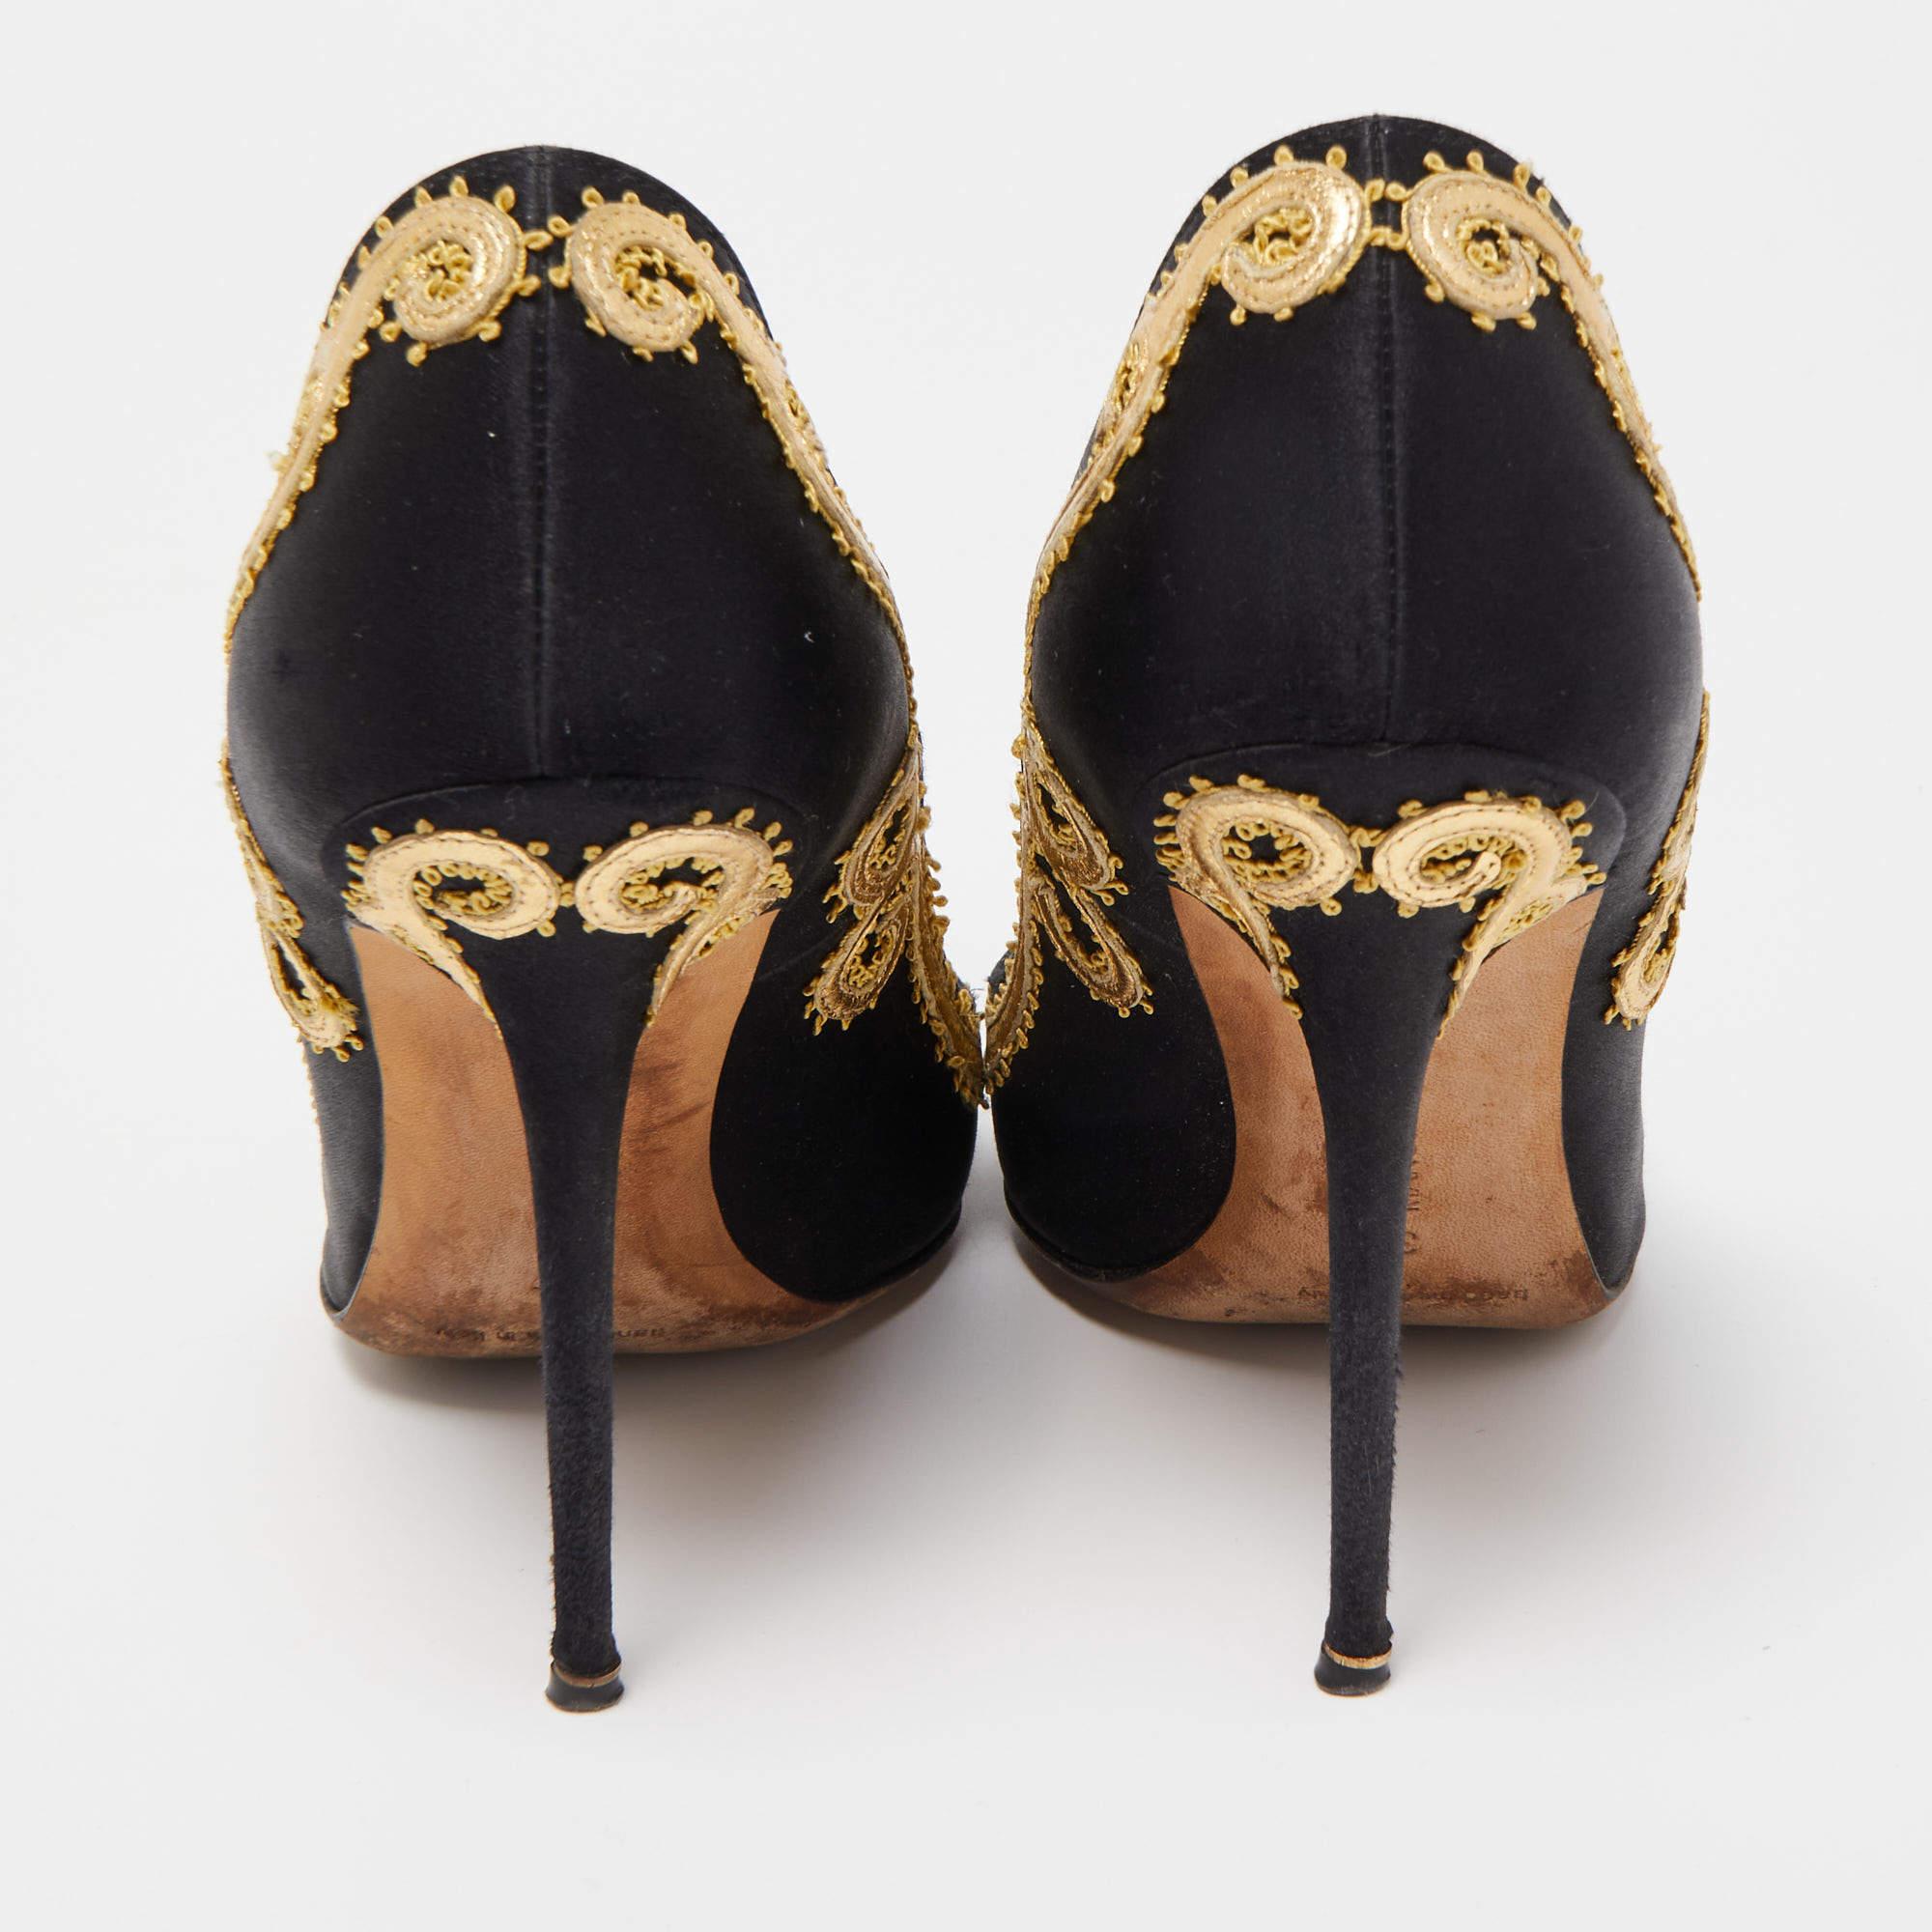 Manolo Blahnik Black/Gold Satin and Leather Embroidered Pumps Size 37 4